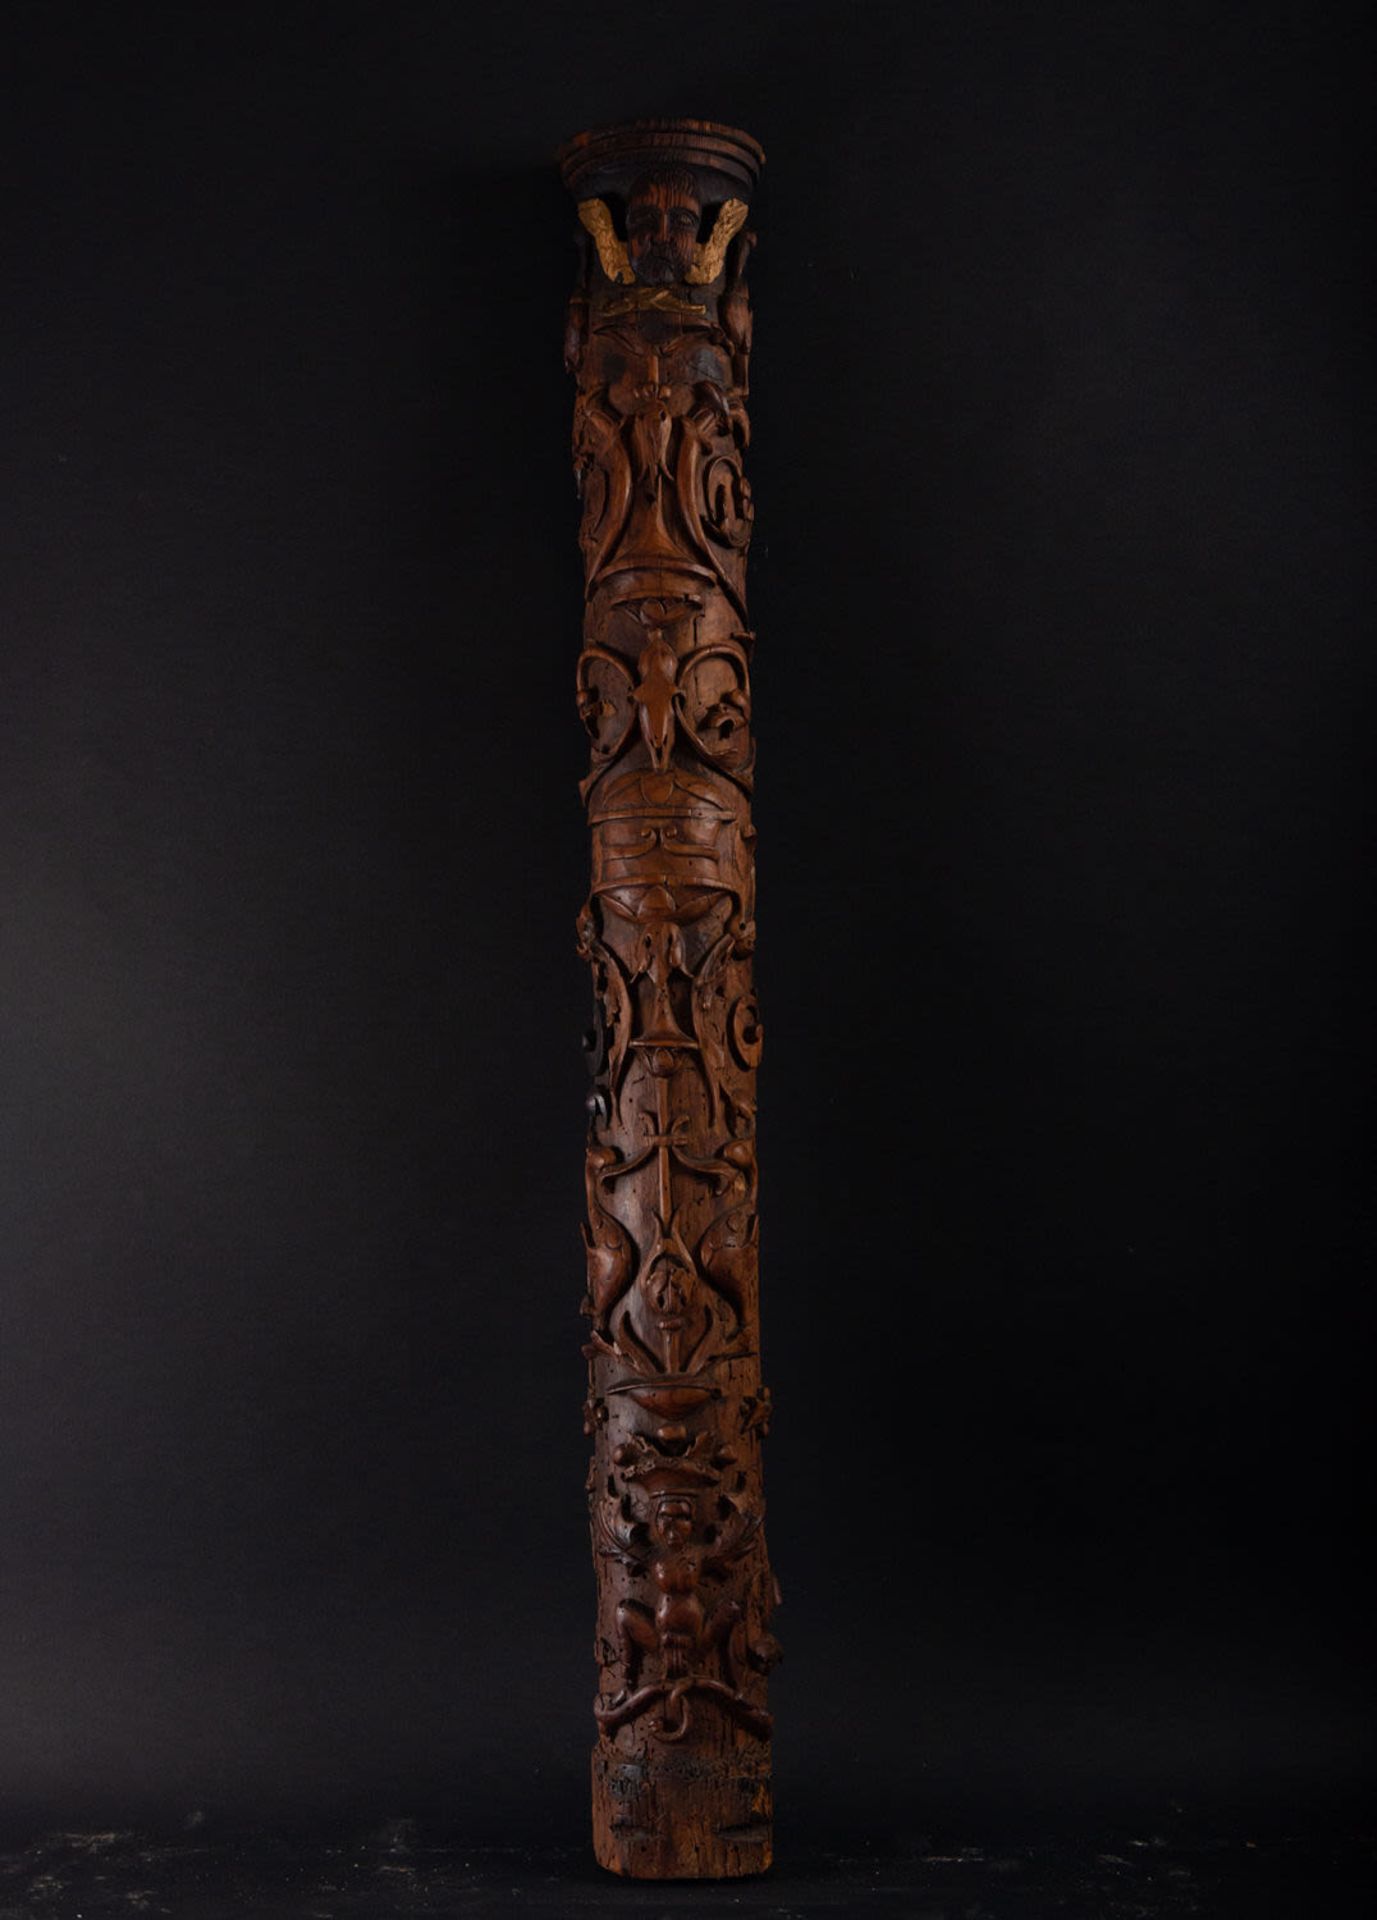 Plateresque column or Pilaster in pinewood, Spanish Renaissance work from the 16th century